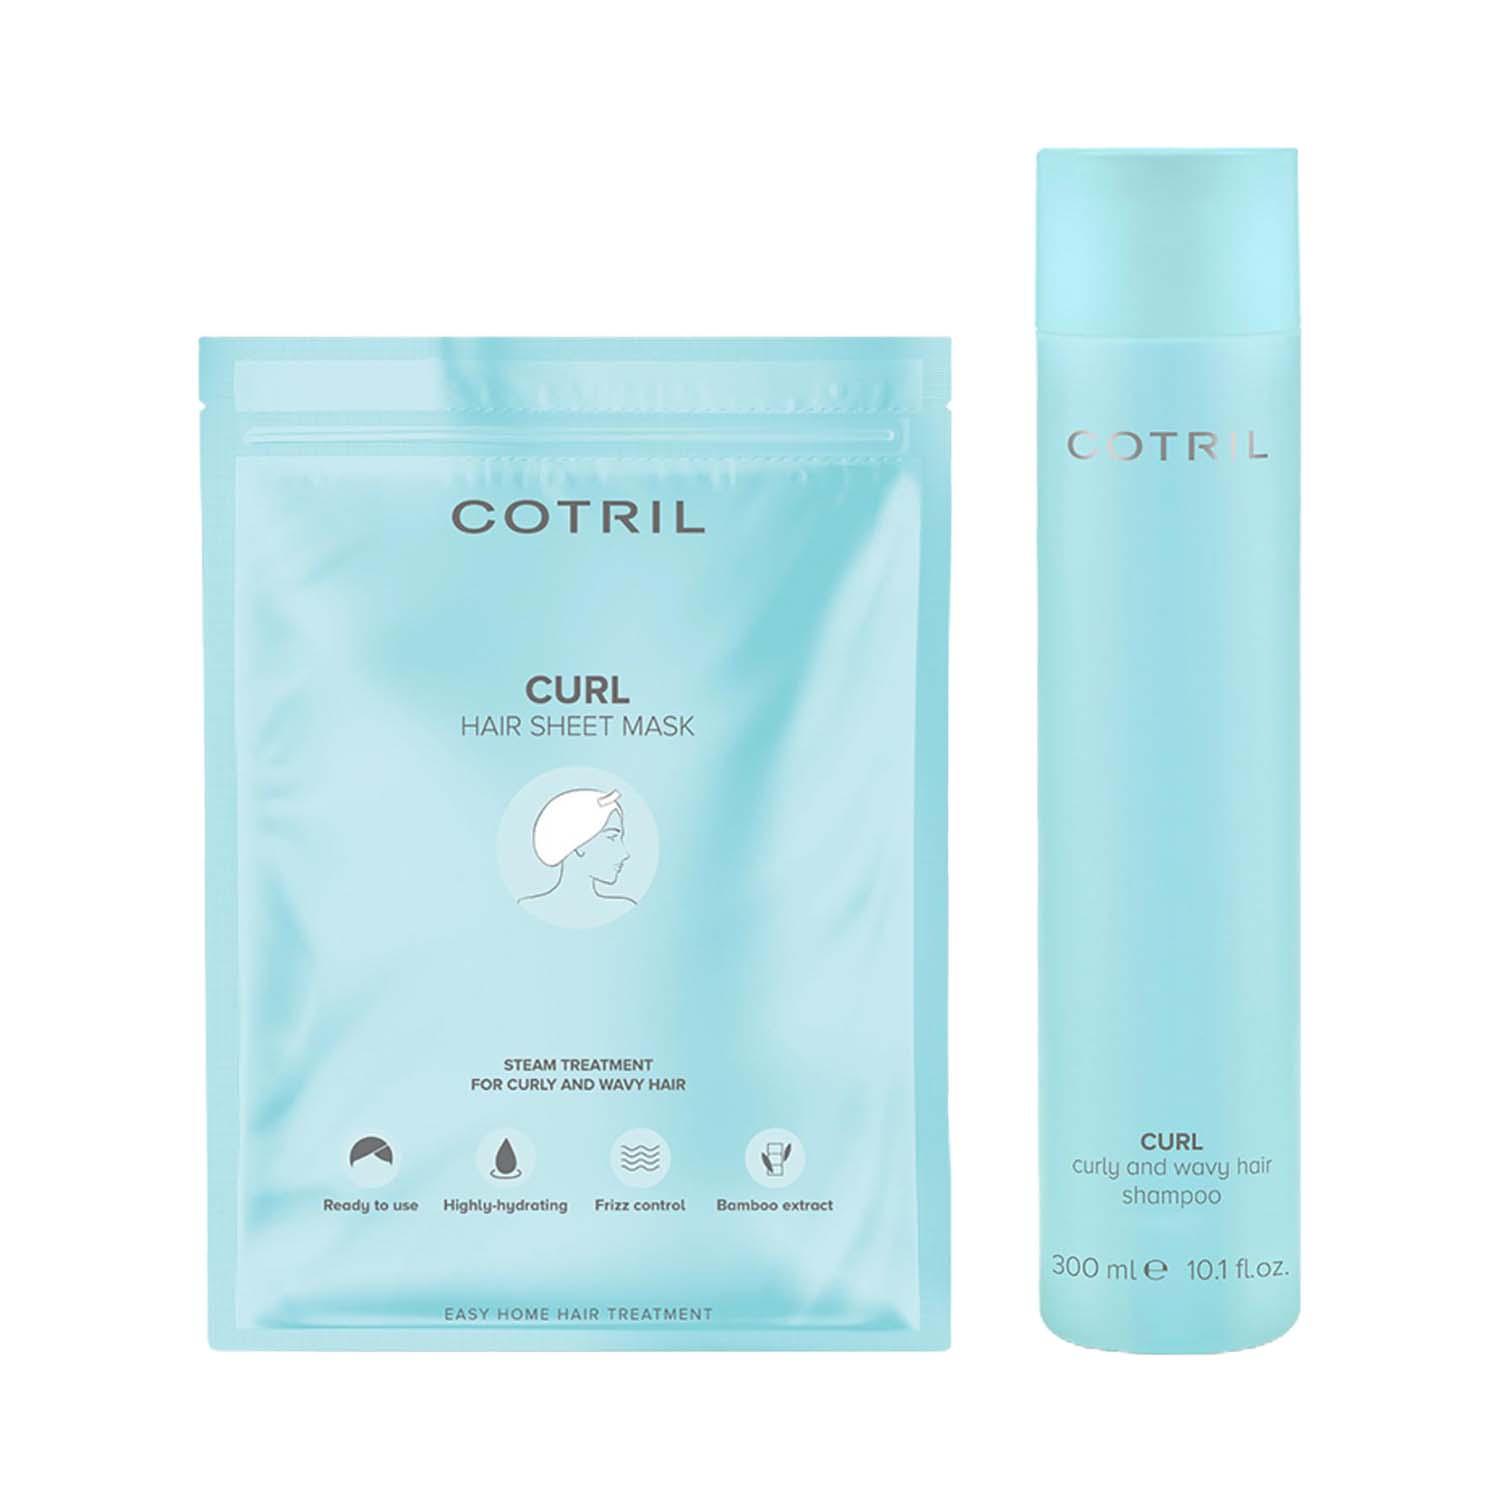 COTRIL | Cotril Curl Shampoo (300 ml) + Hair Mask (35 g) Combo